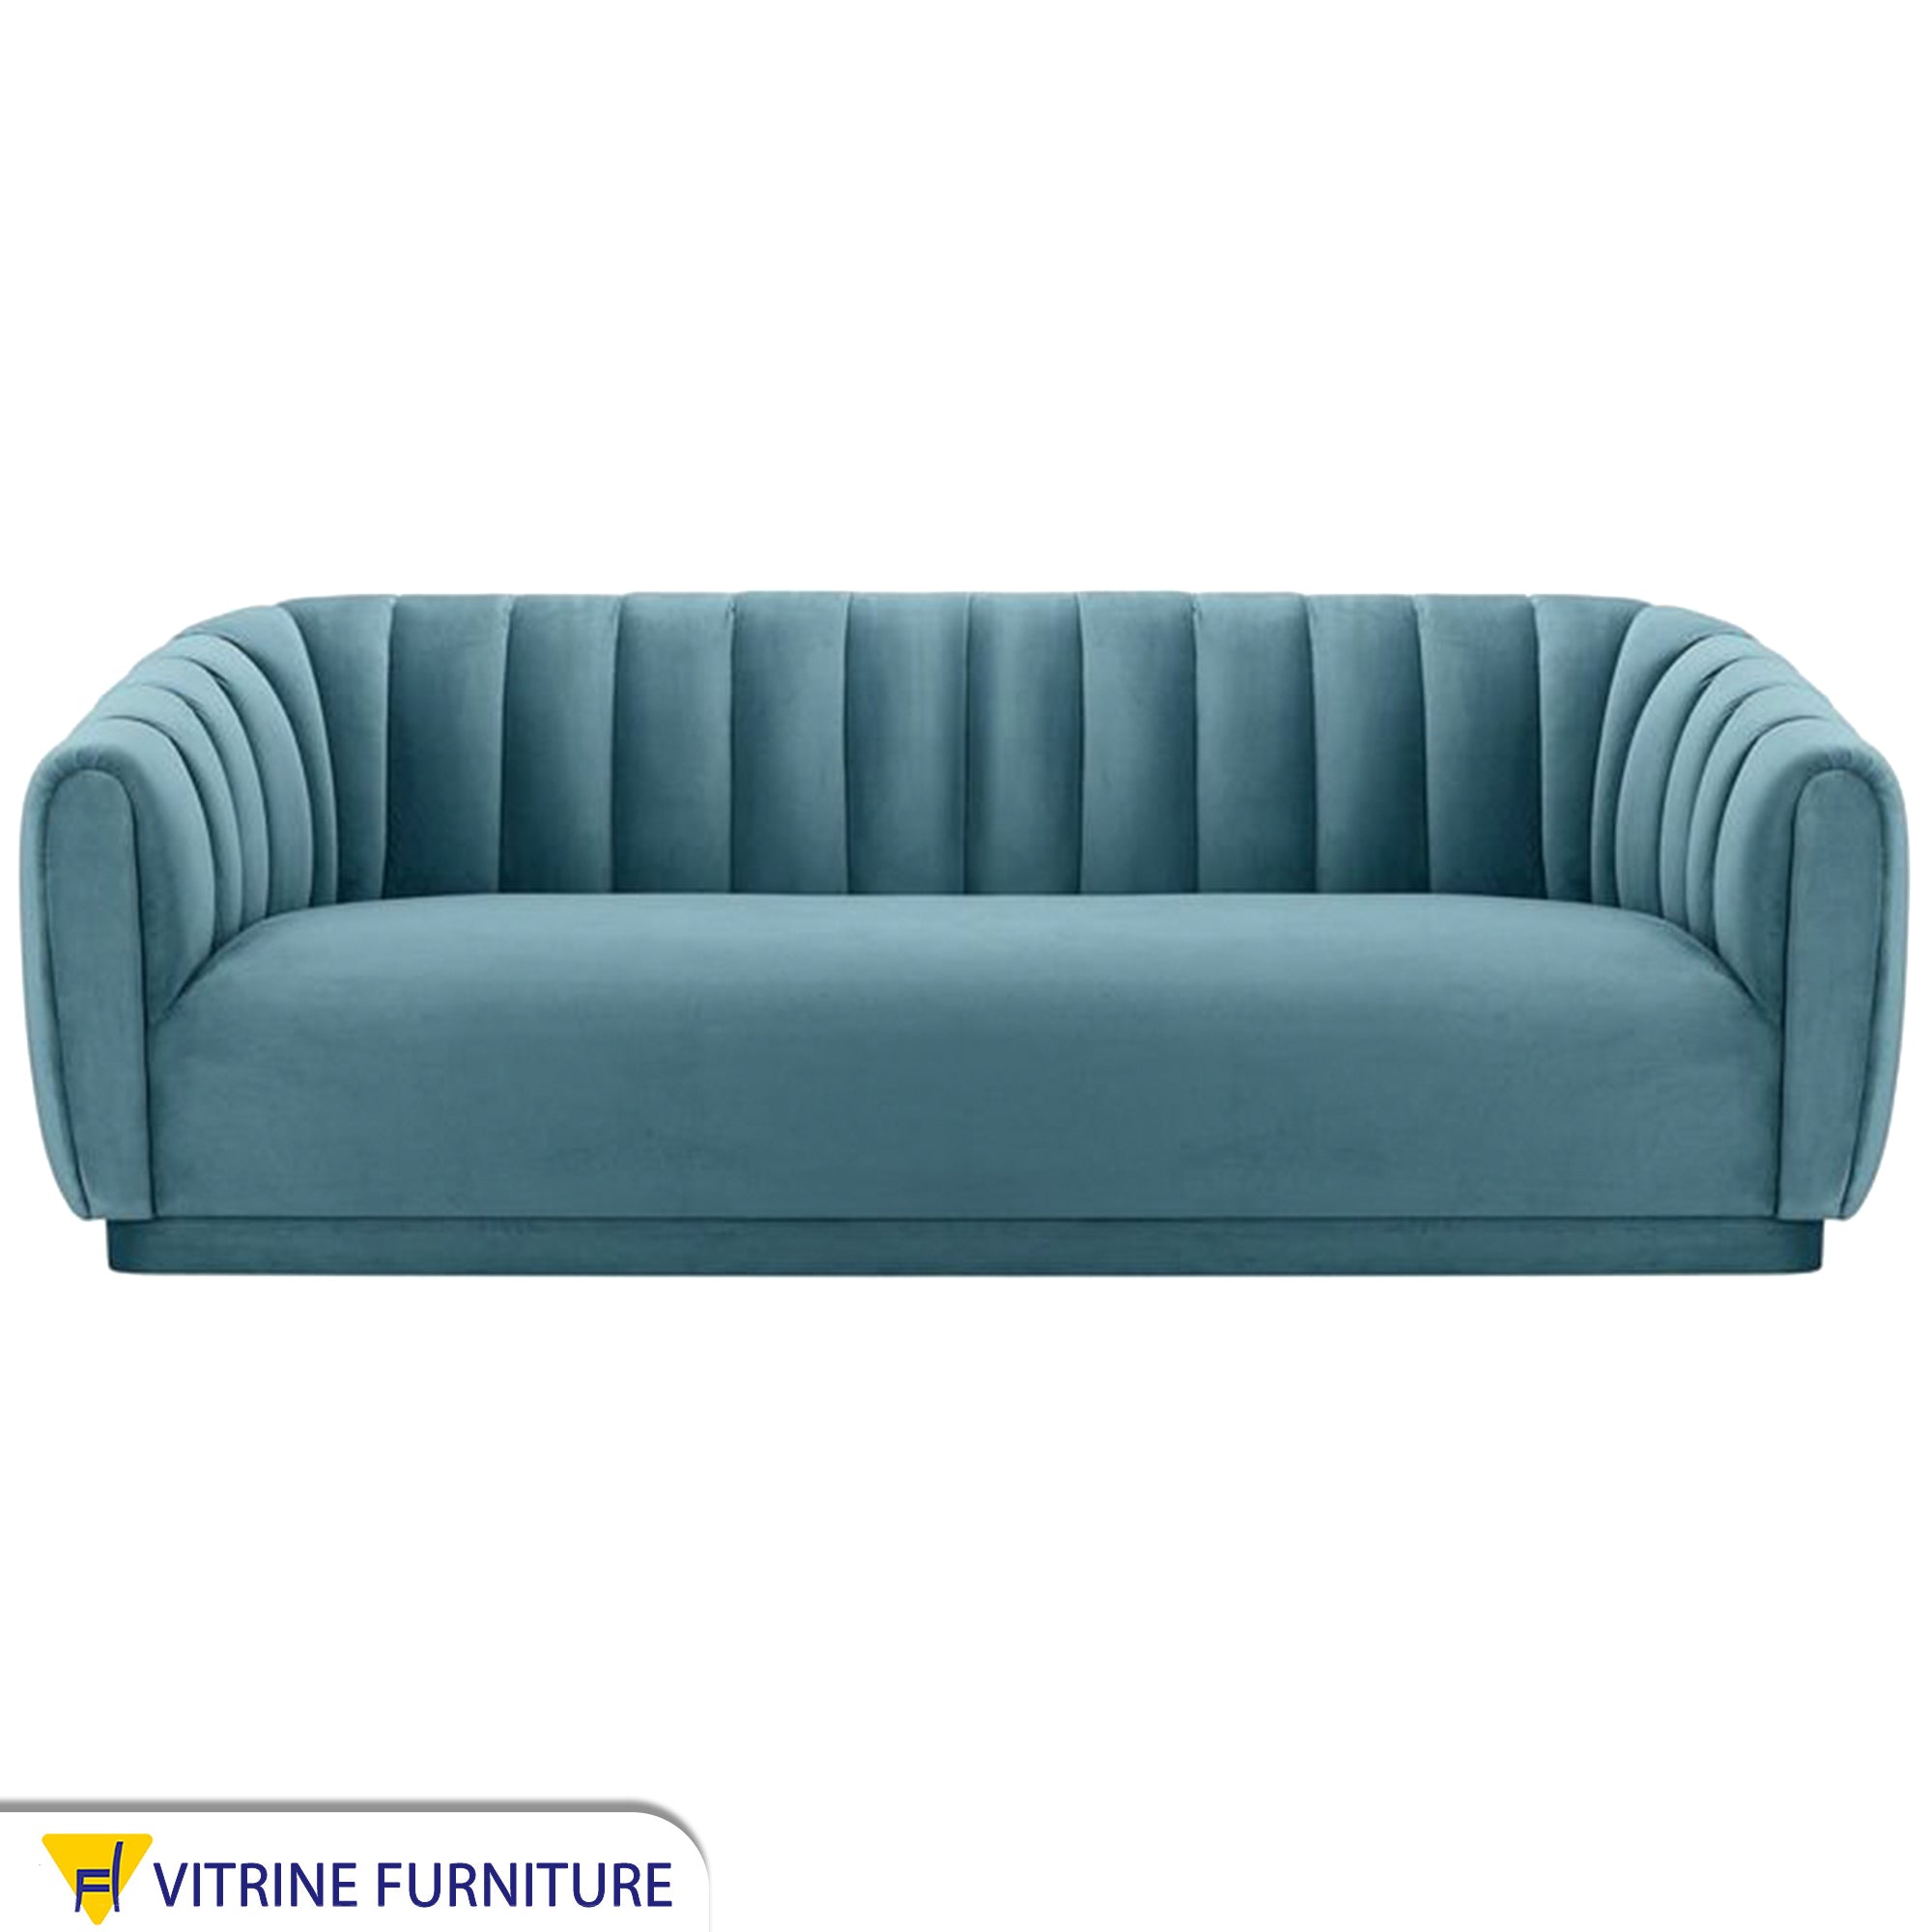 Baby Blue sofa with recessed stitching